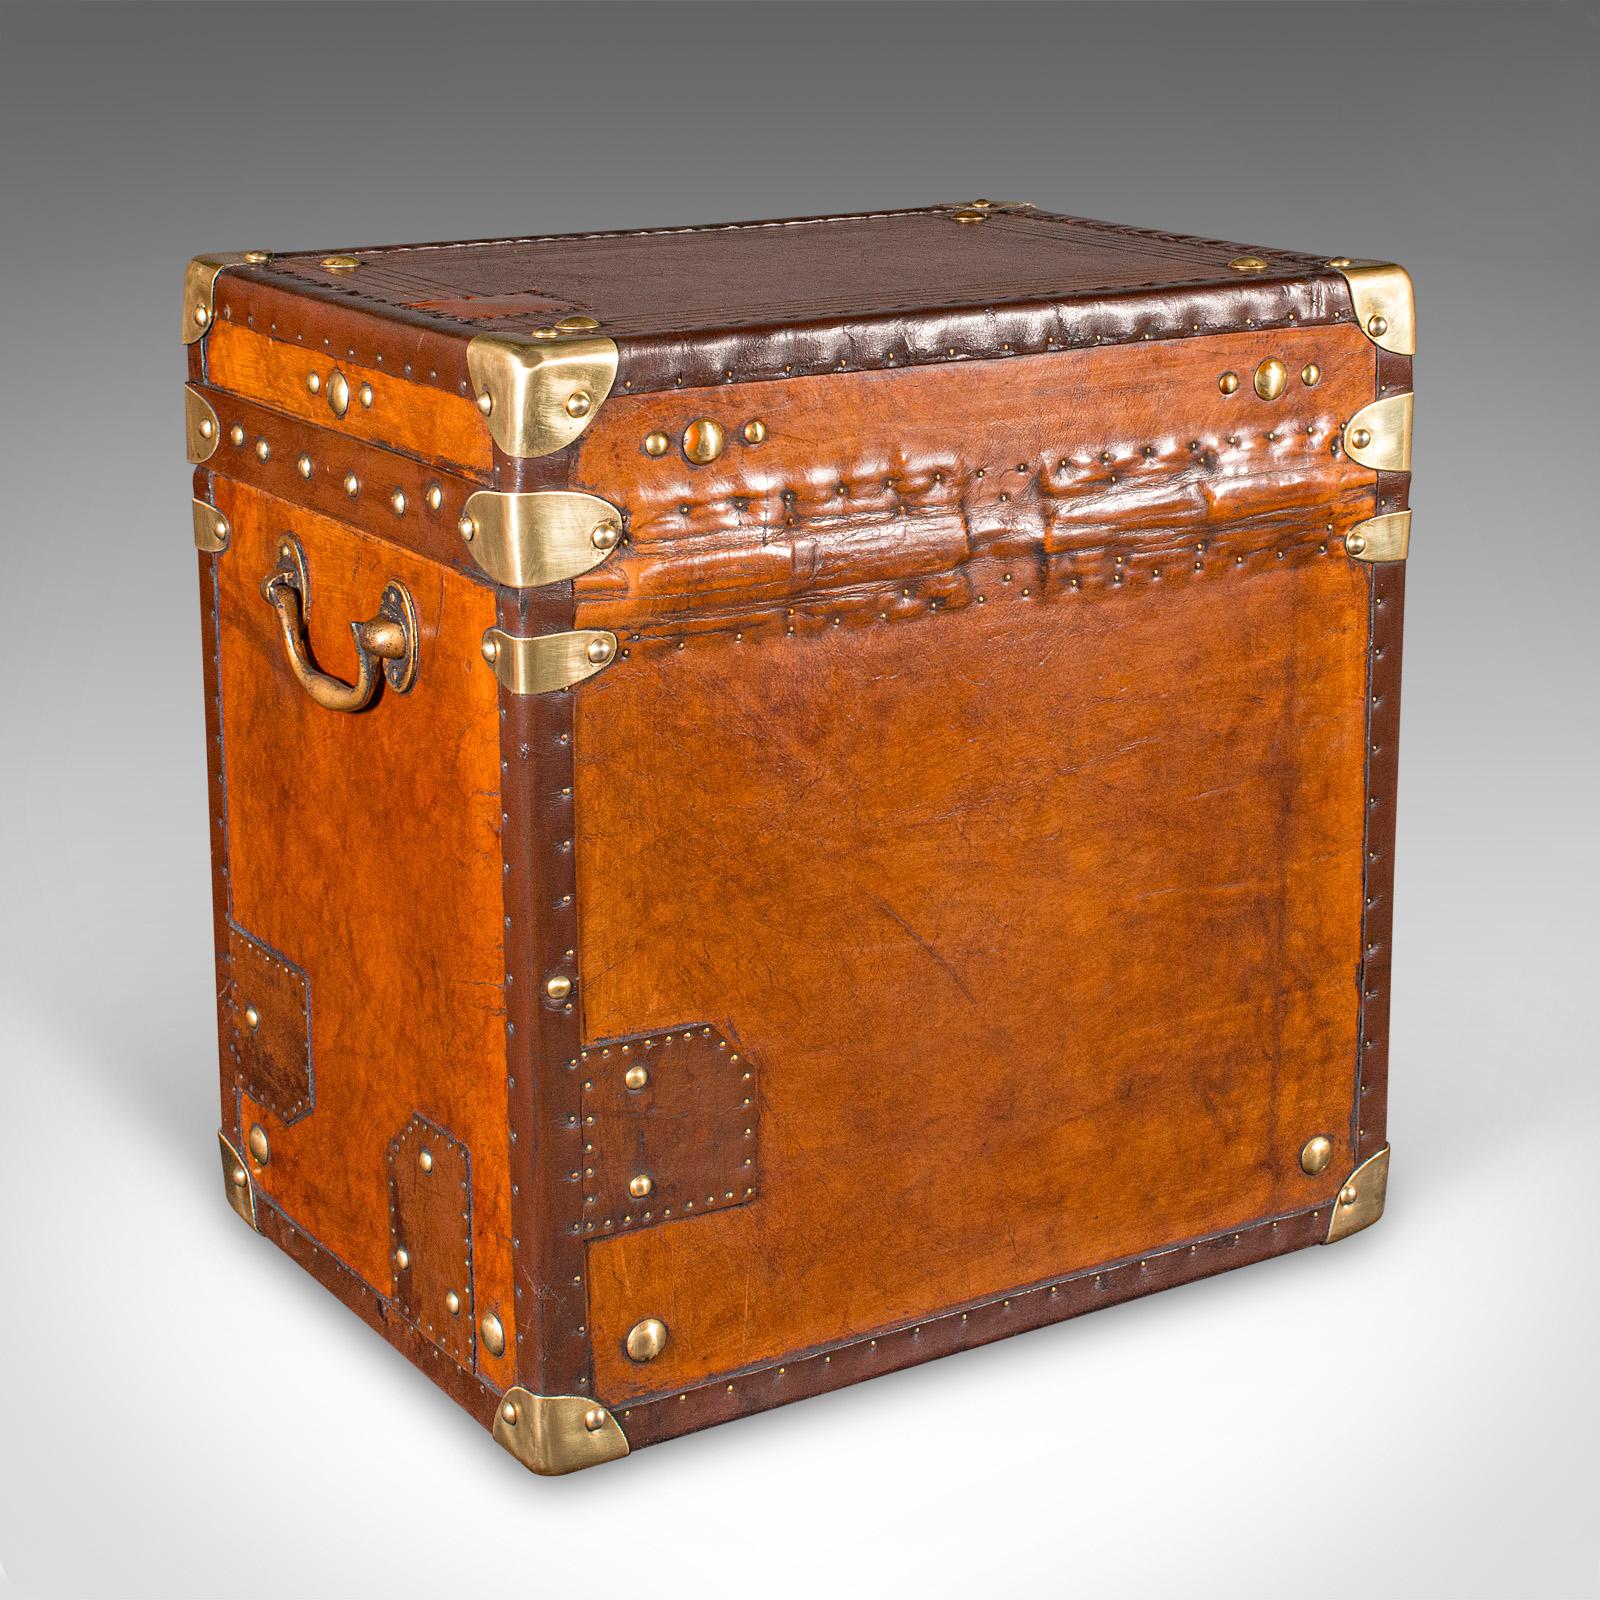 British Pair Of Vintage Campaign Luggage Cases, English, Leather, Bedroom Nightstands For Sale